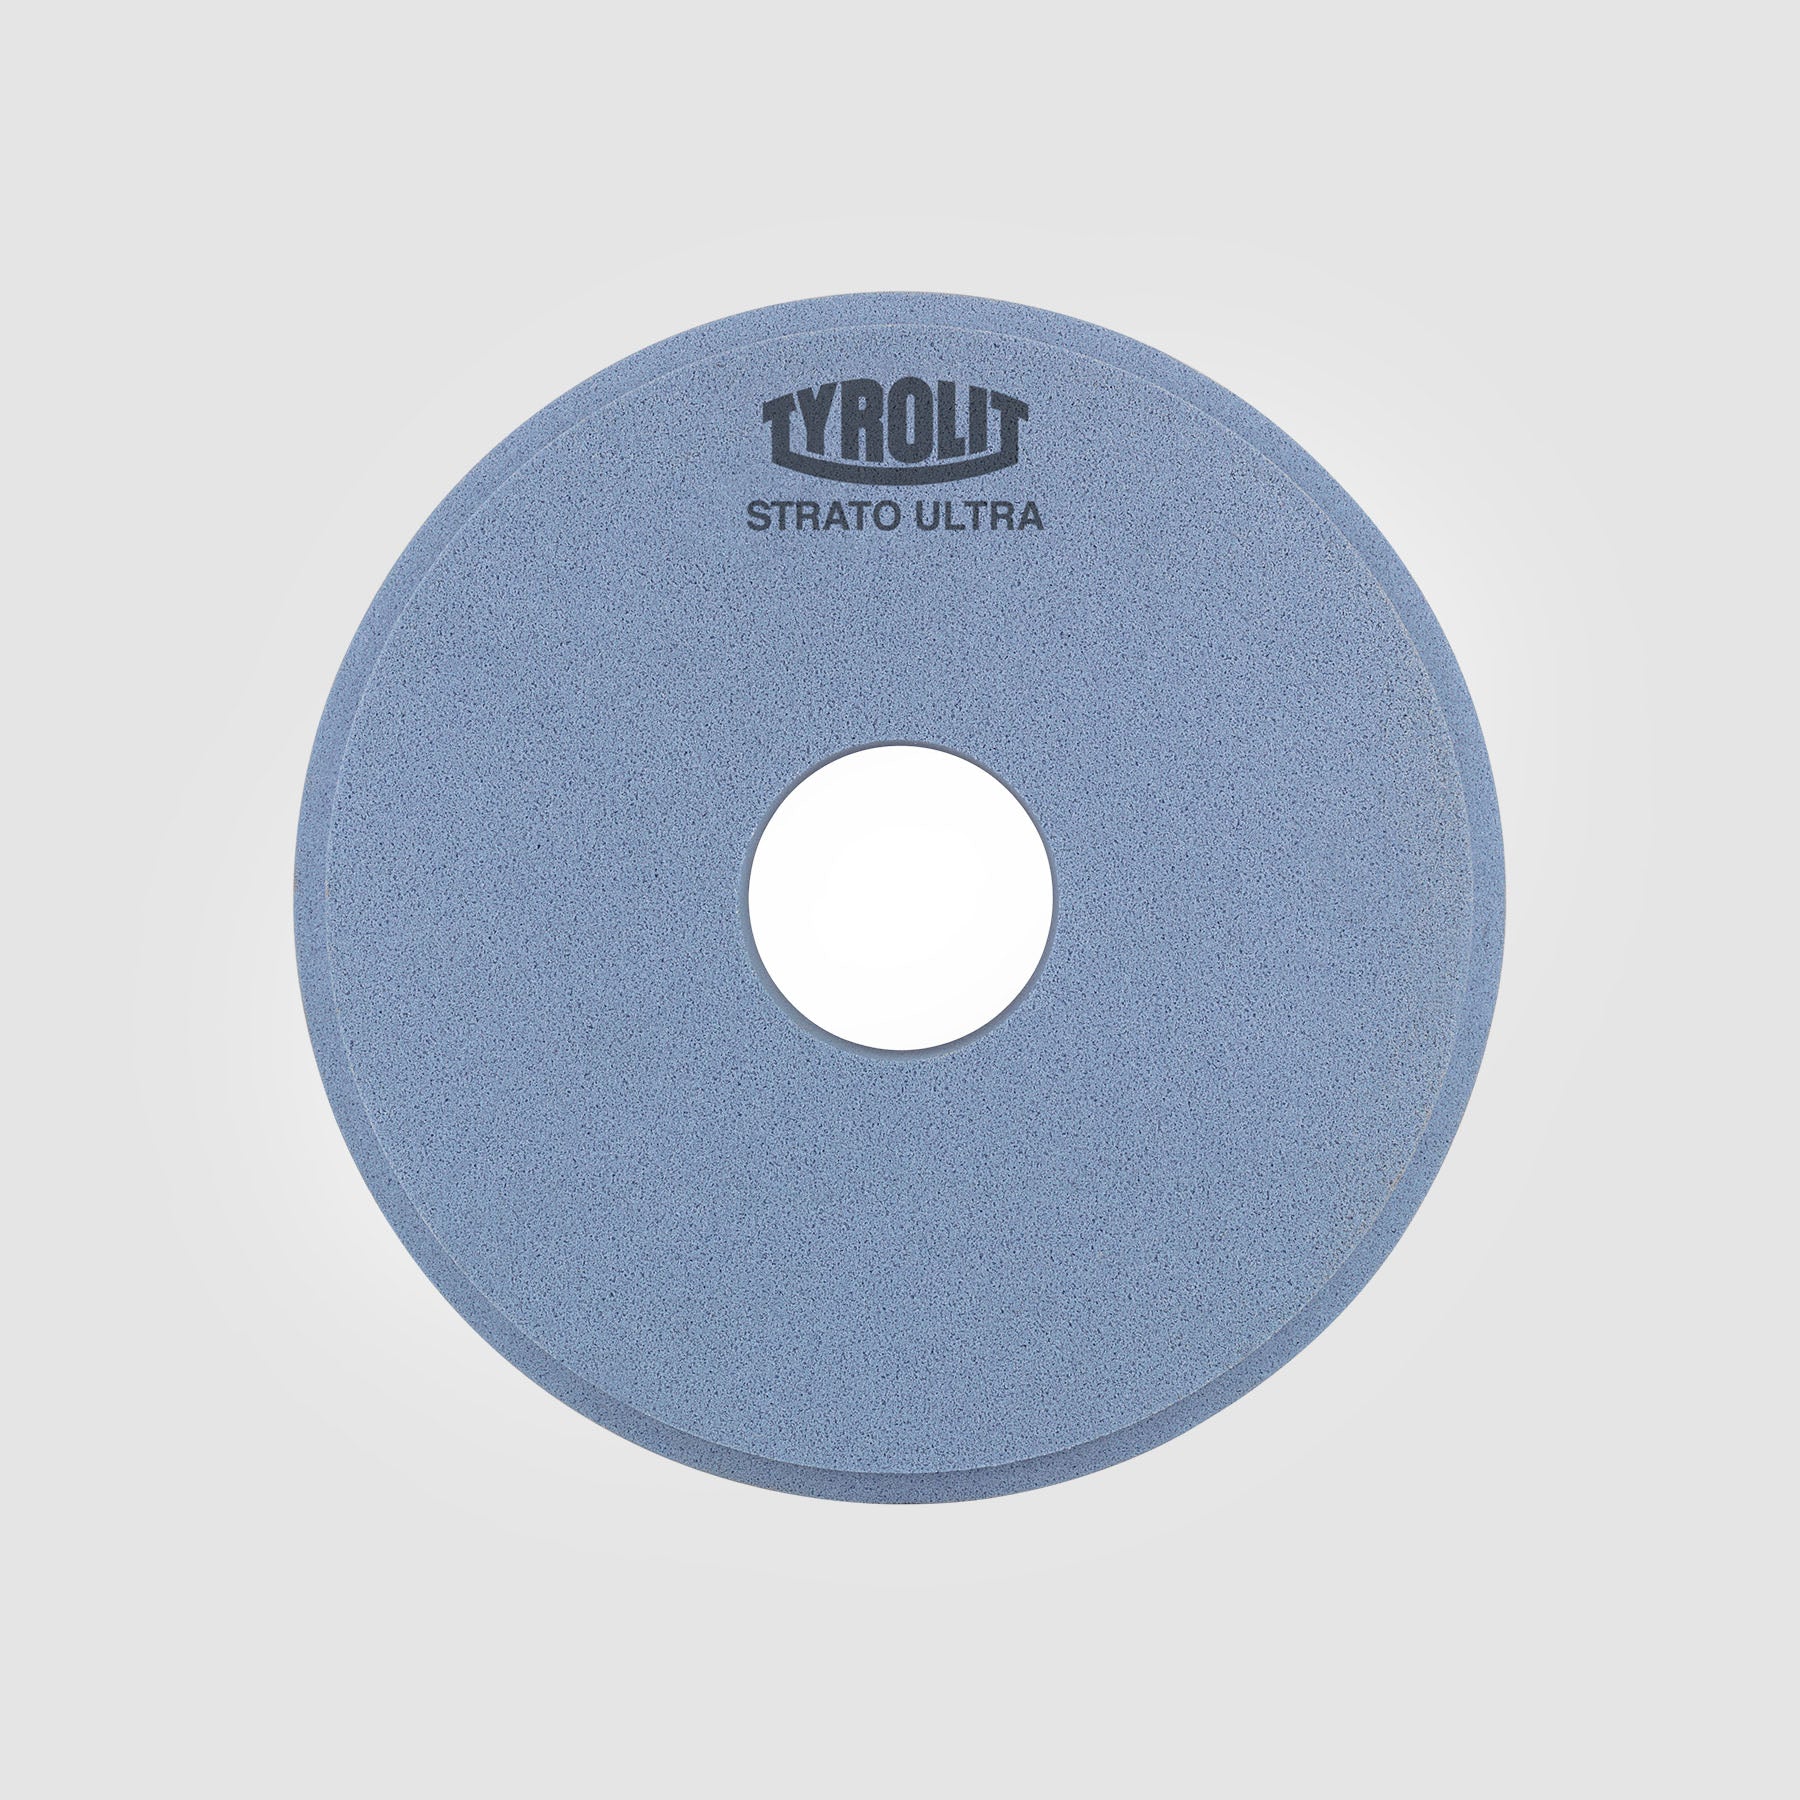 STRATO-ULTRA 16" X 3" X 5" | Grade GG | Grit 60 for Surface Grinding